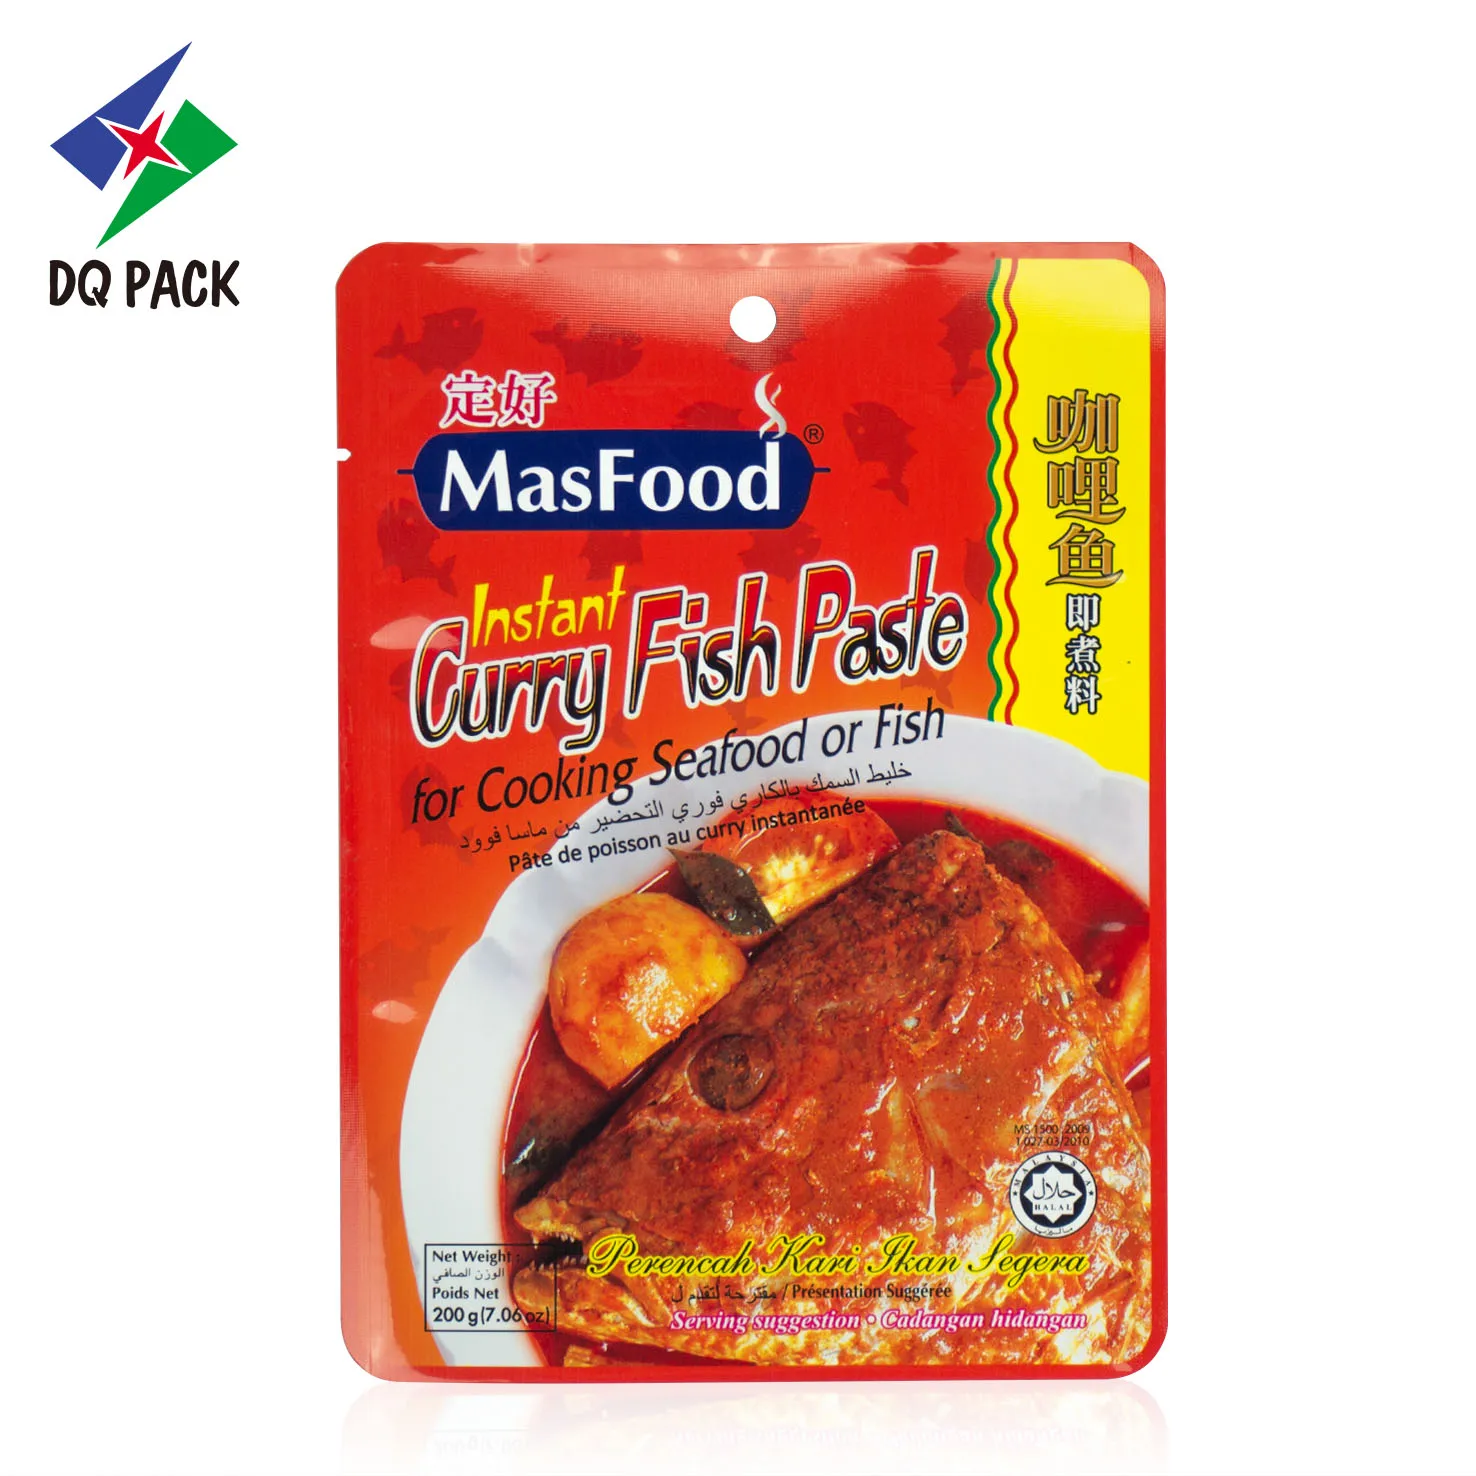 DQ PACK flexible packaging food pouch with food grade for Curry